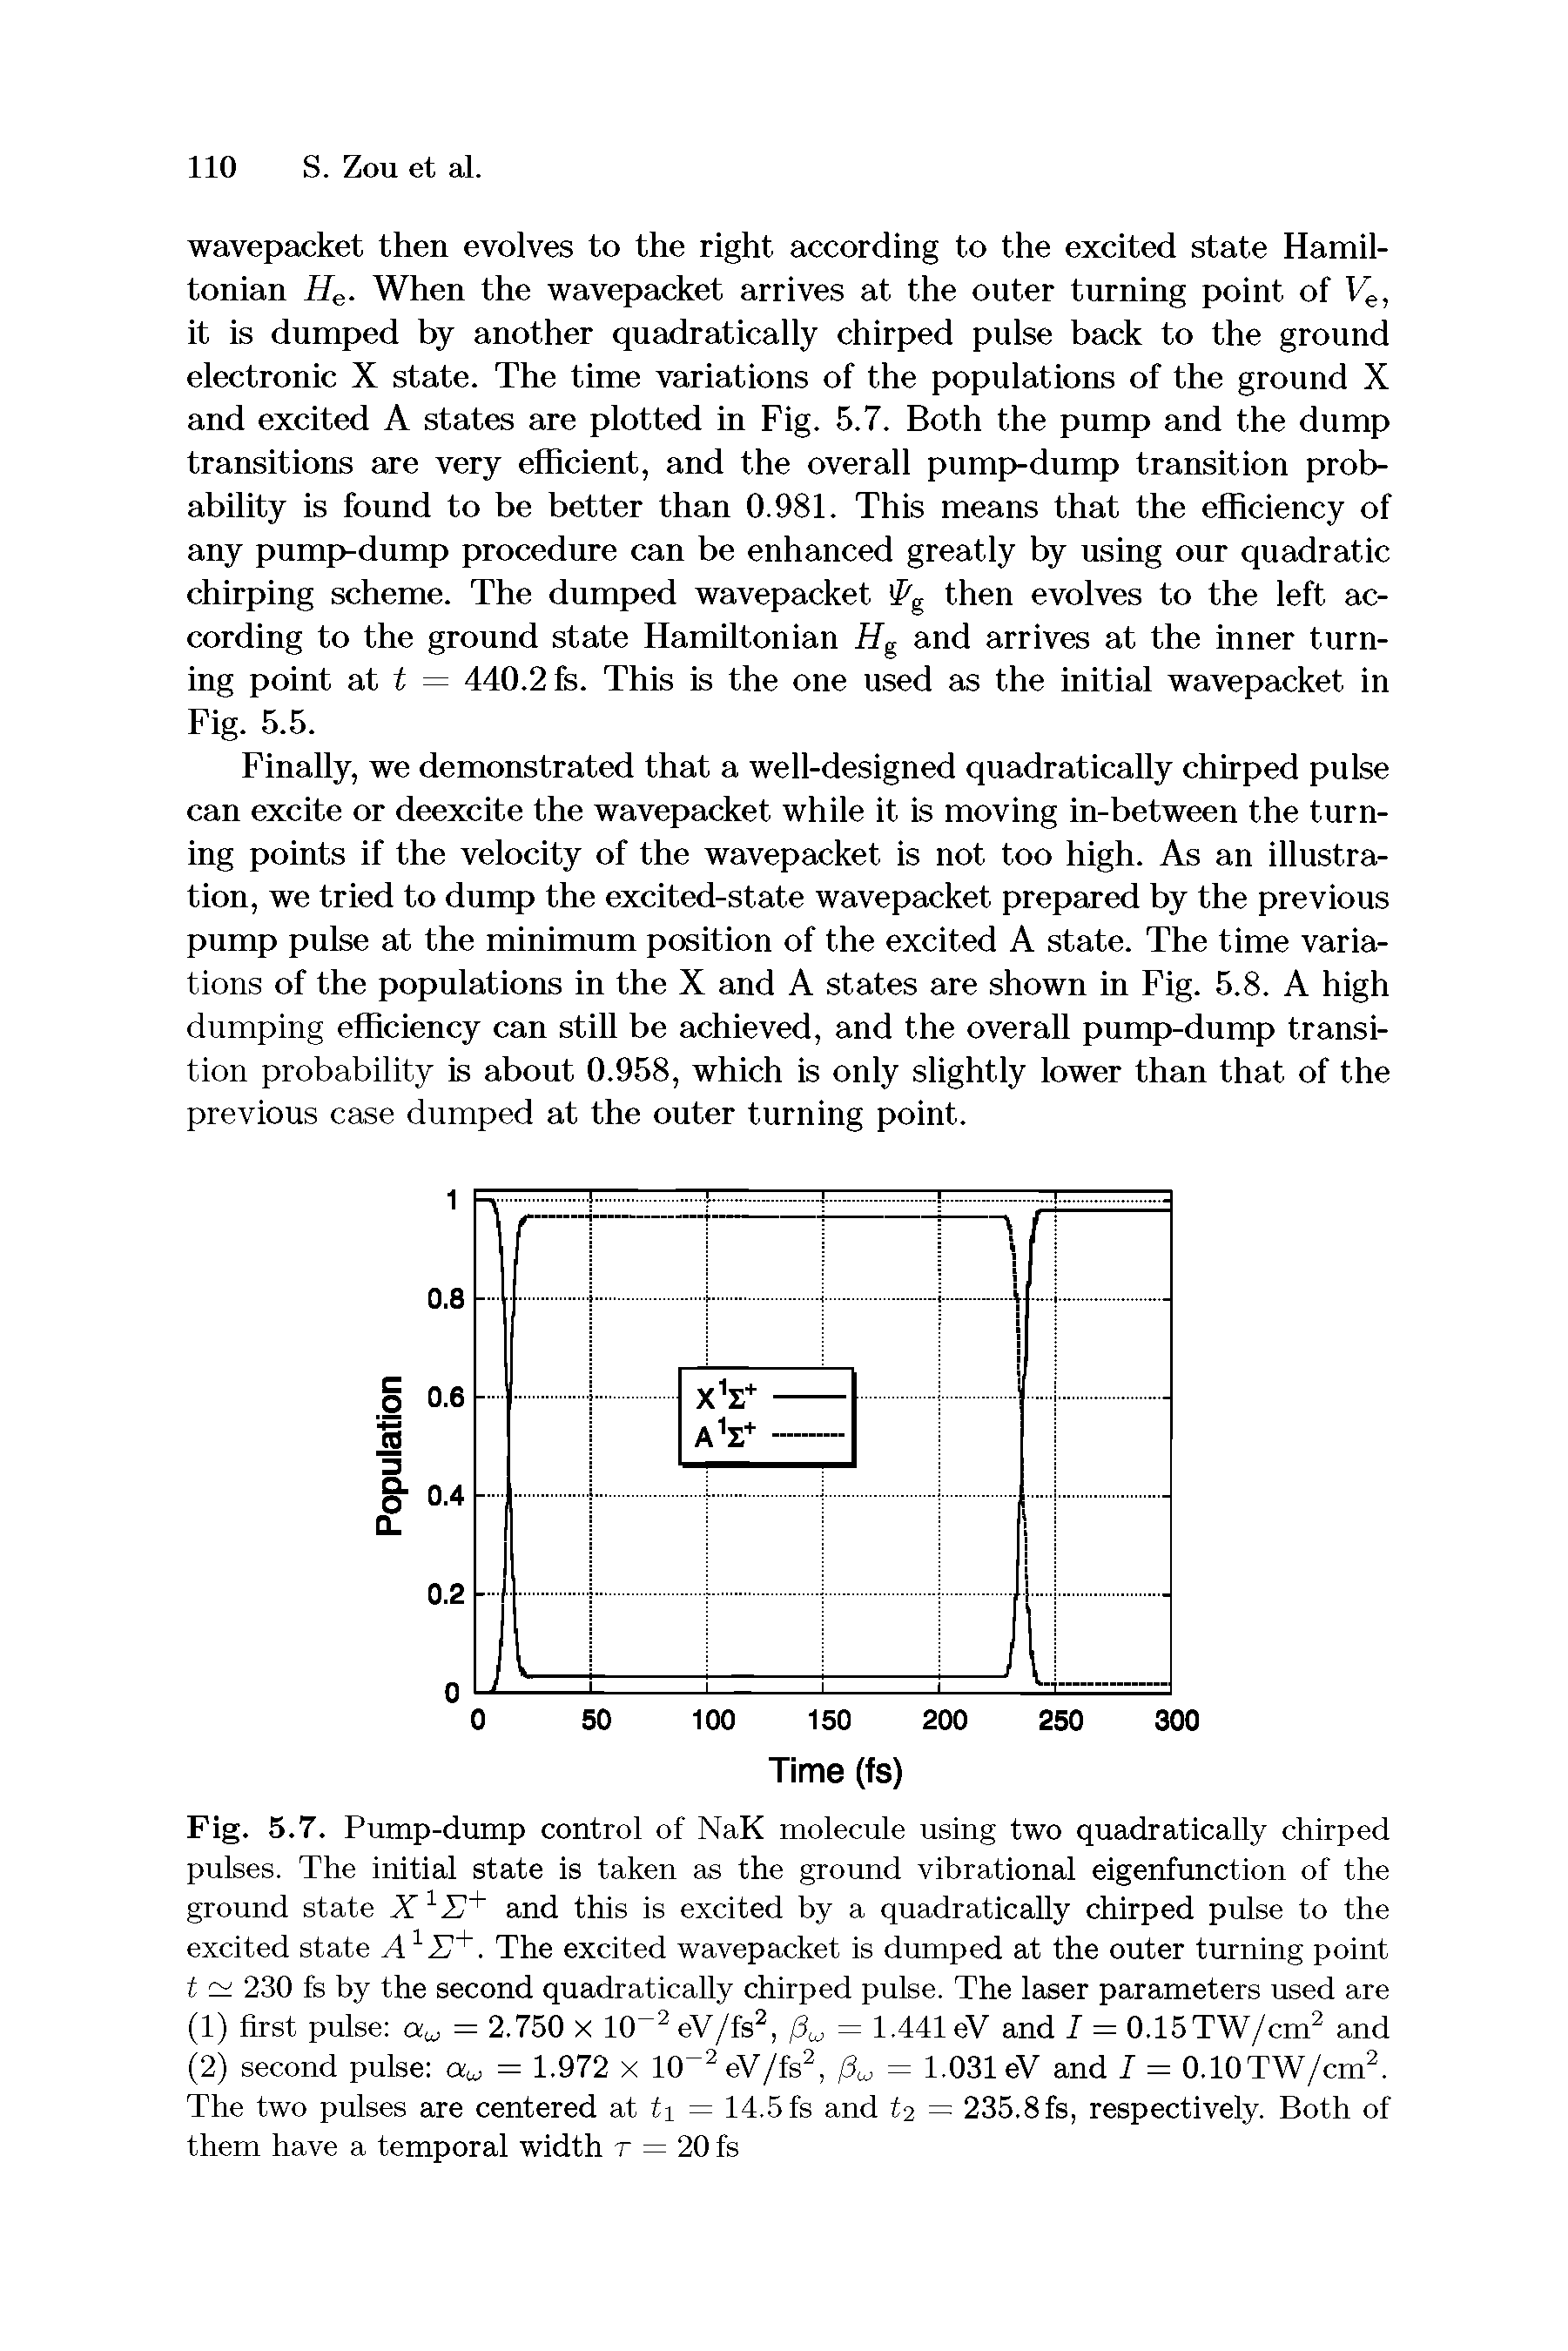 Fig. 5.7. Pump-dump control of NaK molecule using two quadratically chirped pulses. The initial state is taken as the ground vibrational eigenfunction of the ground state X1S+ and this is excited by a quadratically chirped pulse to the excited state A1E+. The excited wavepacket is dumped at the outer turning point t cs 230 fs by the second quadratically chirped pulse. The laser parameters used are...